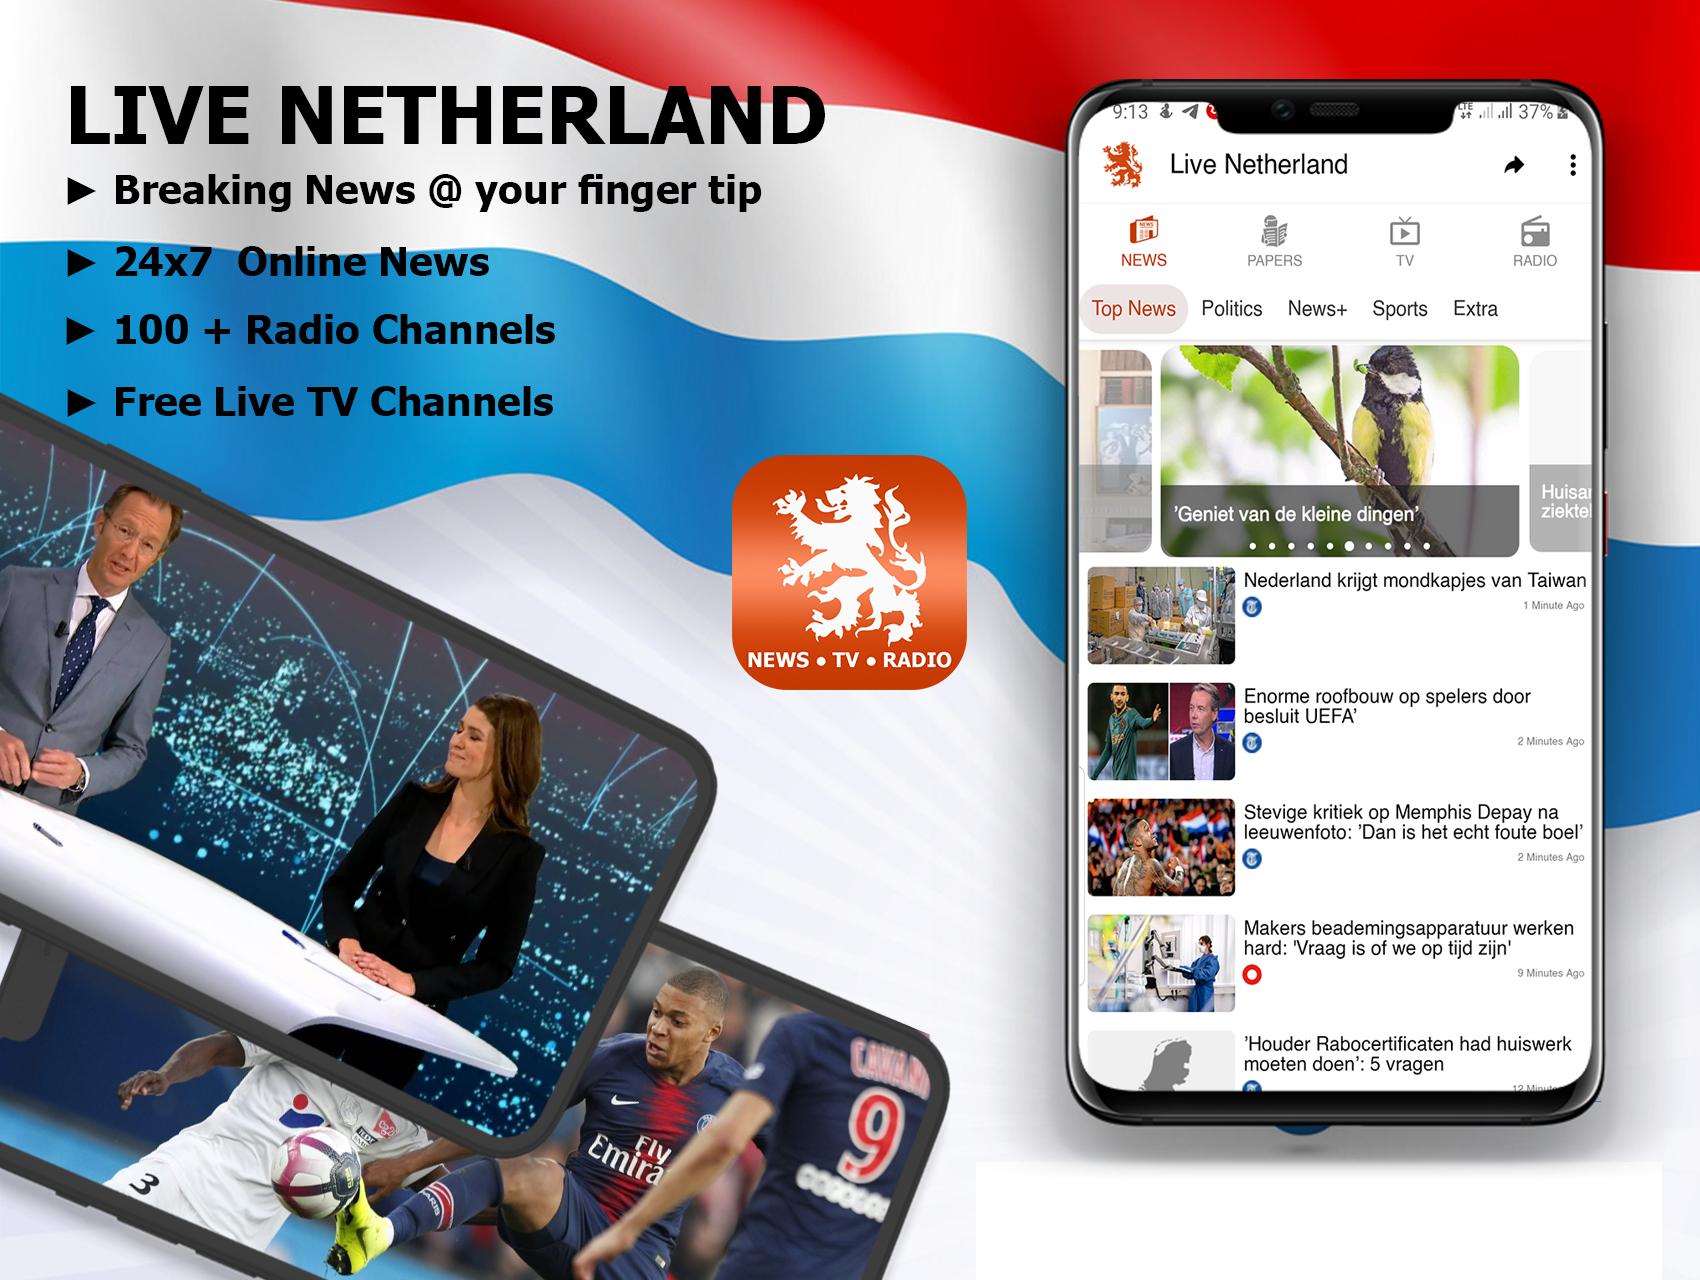 DUTCH LIVE TV, 24x7-DUTCH NEWS & ONLINE RADIO for Android - APK Download